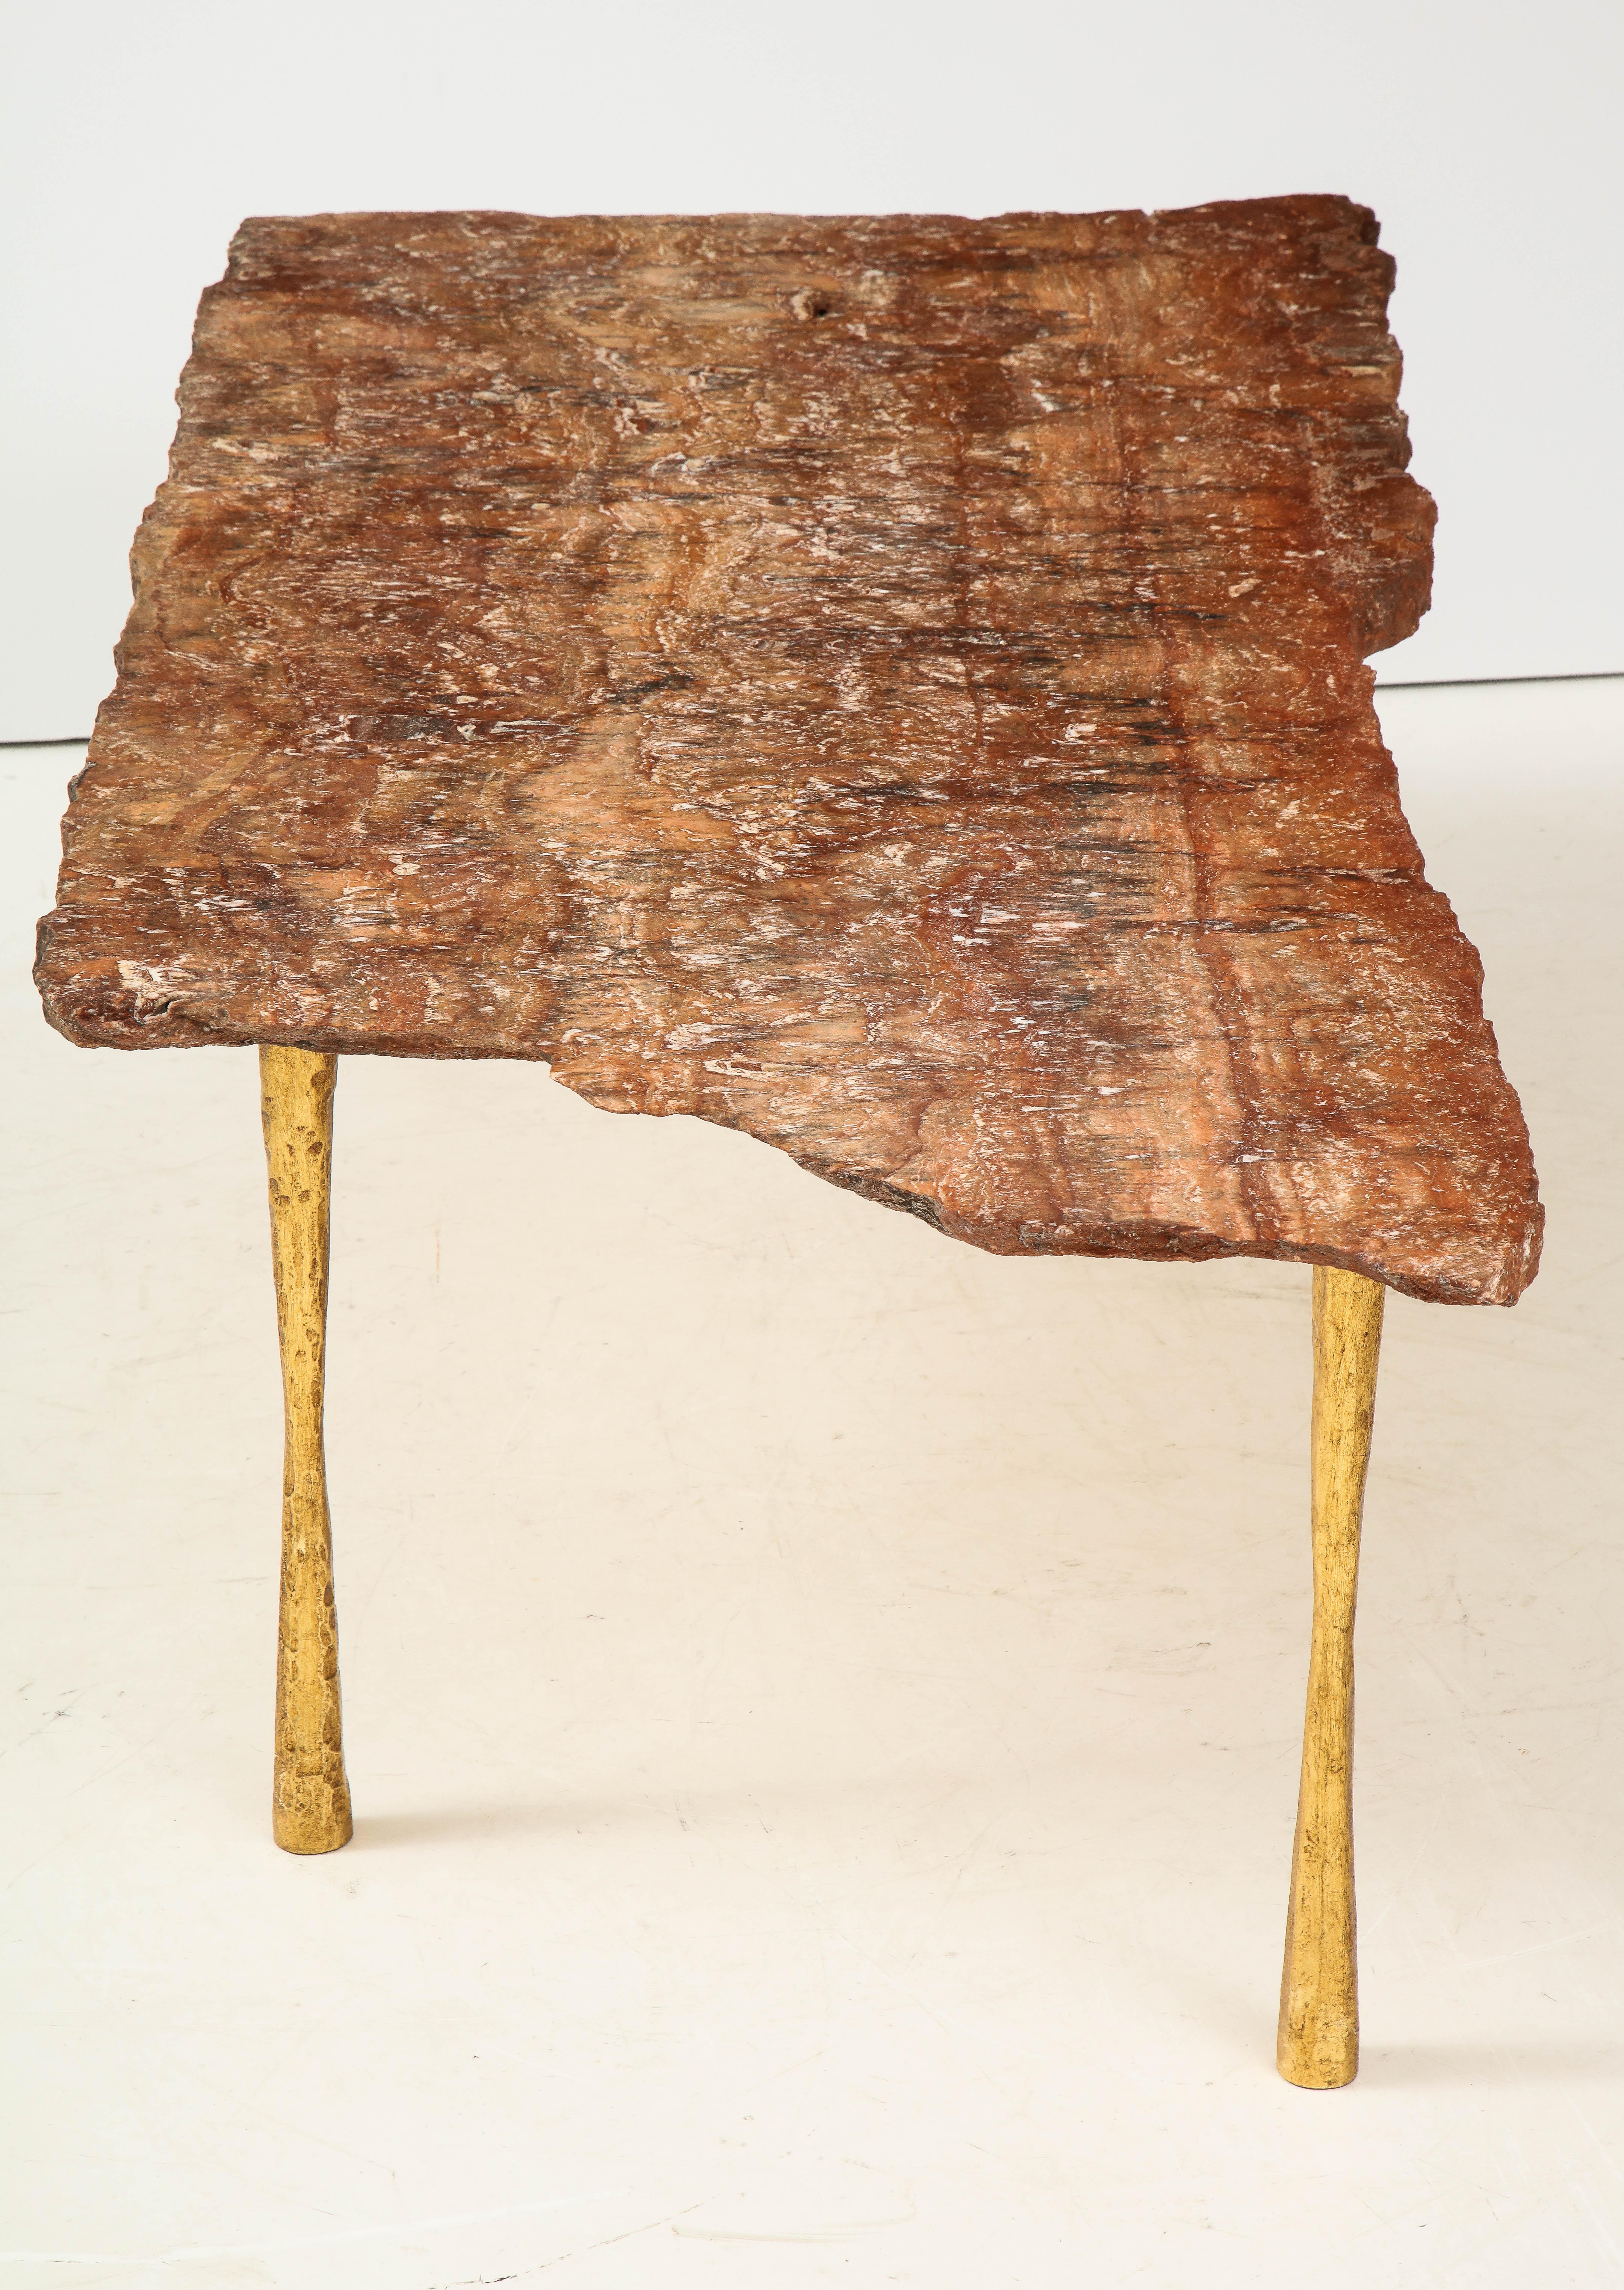 Red Brown Travertine Natural Edge Slab Stone and Gold Leaf Cocktail Table, Italy For Sale 5